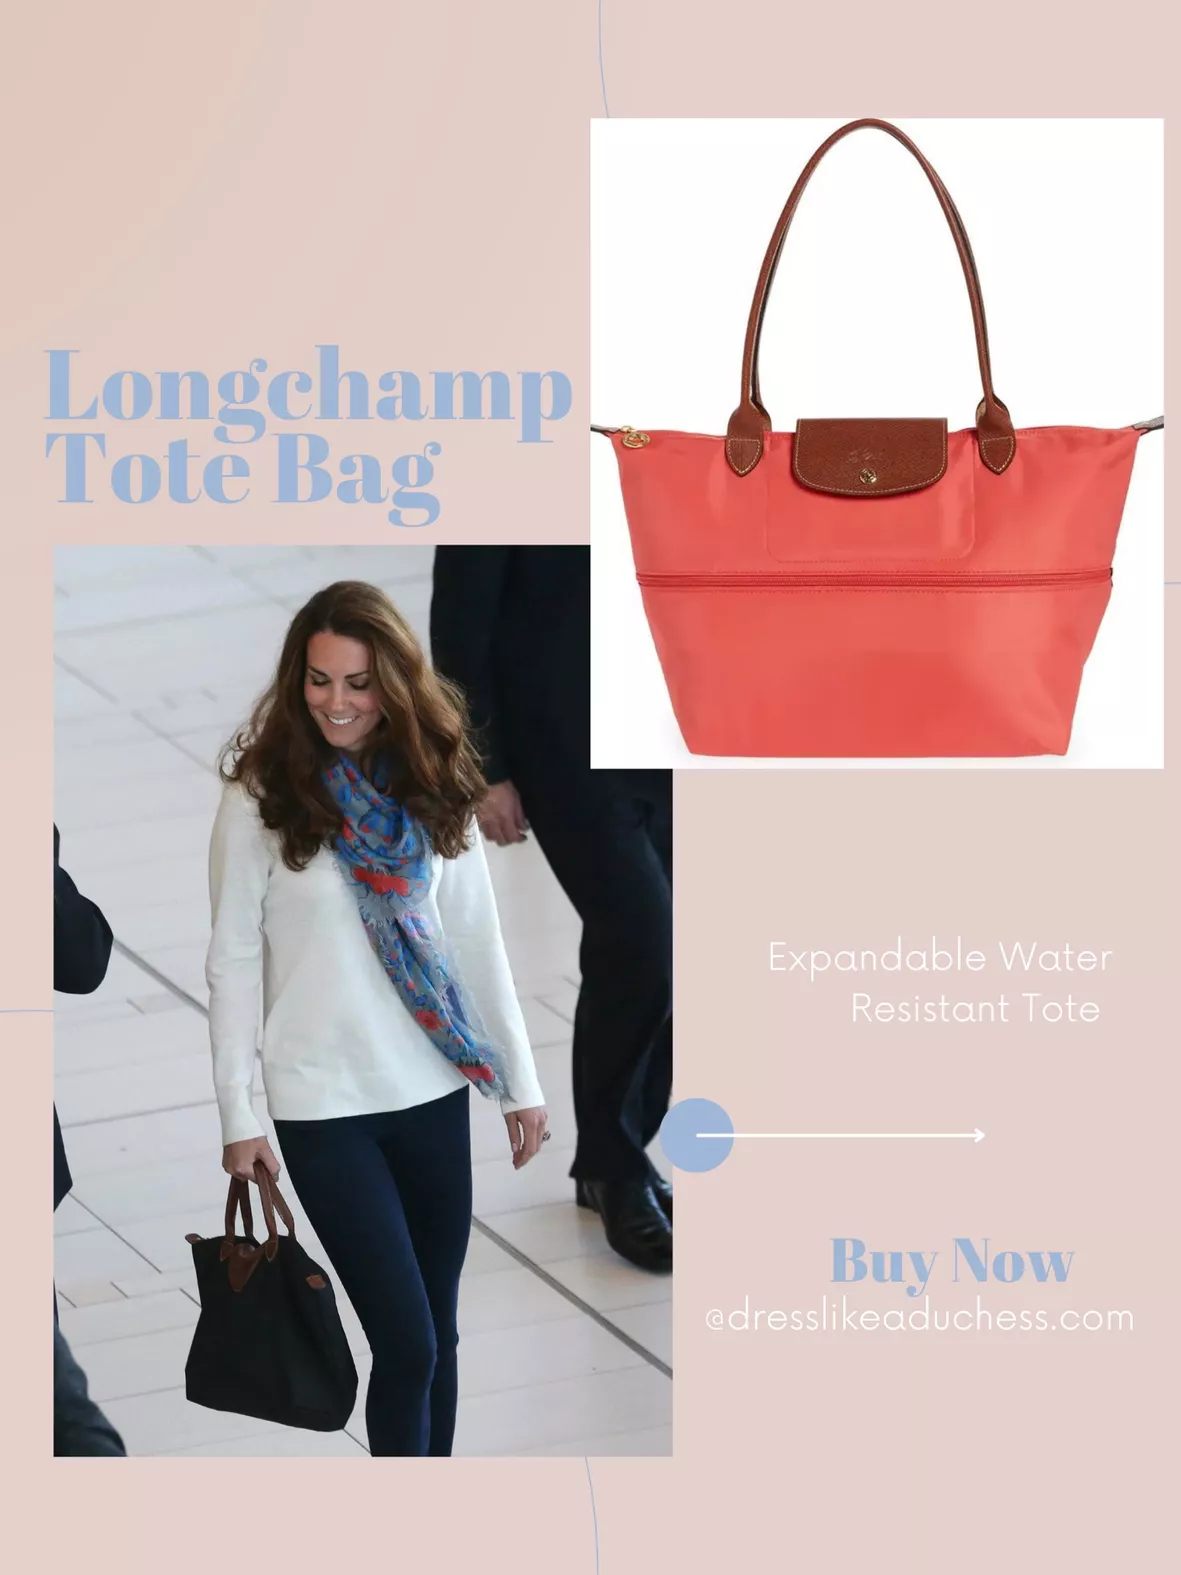 Kate Middleton's Love of Longchamp Tote Bags Is So Relatable